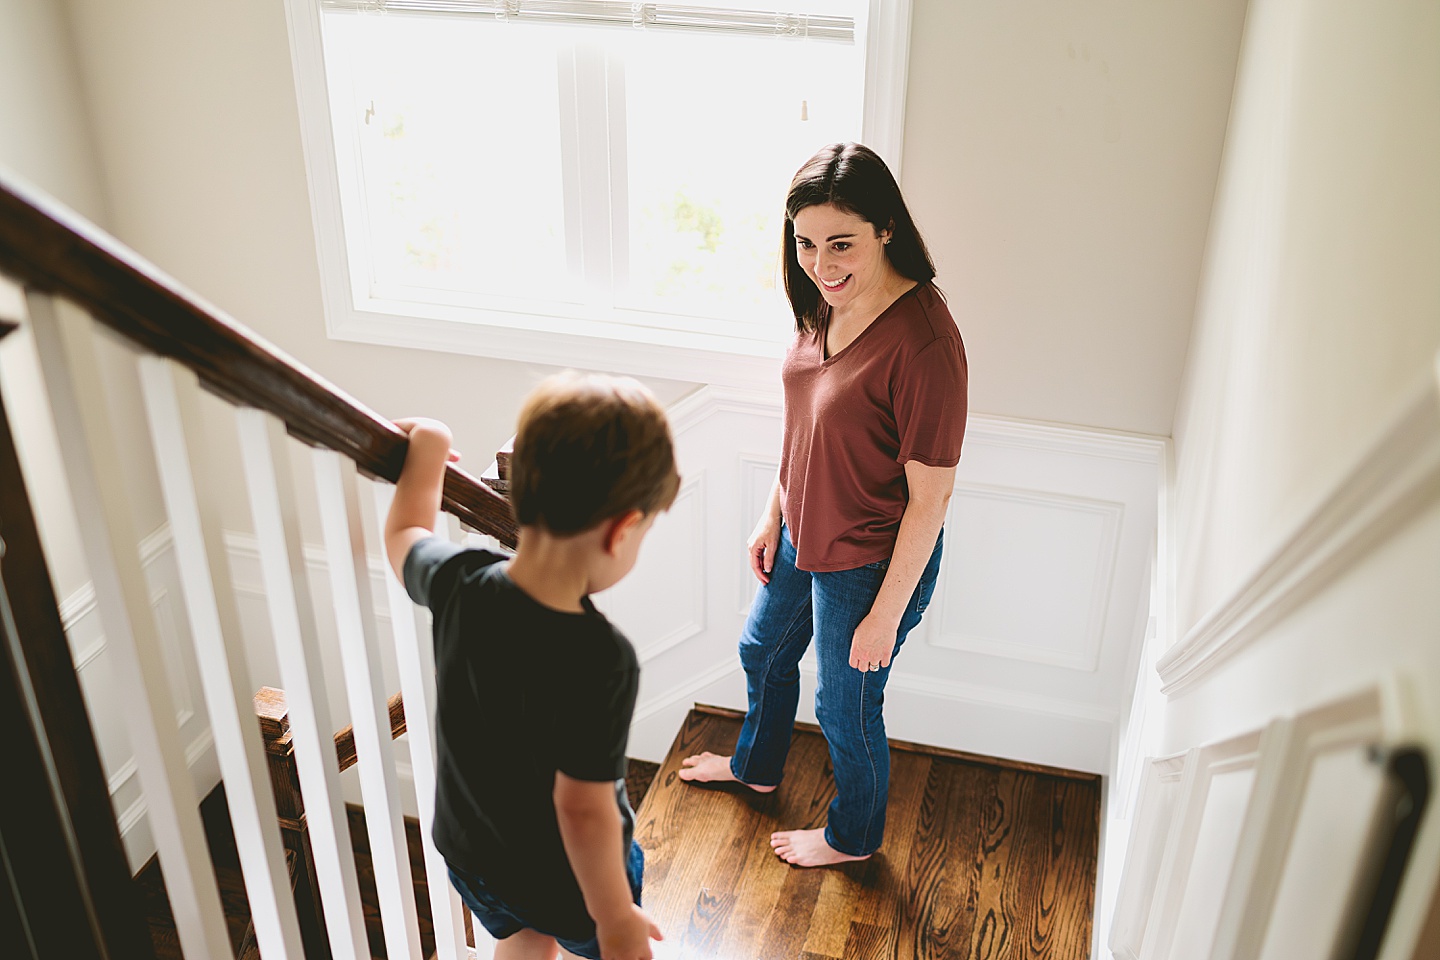 Mom walking down the stairs with toddler